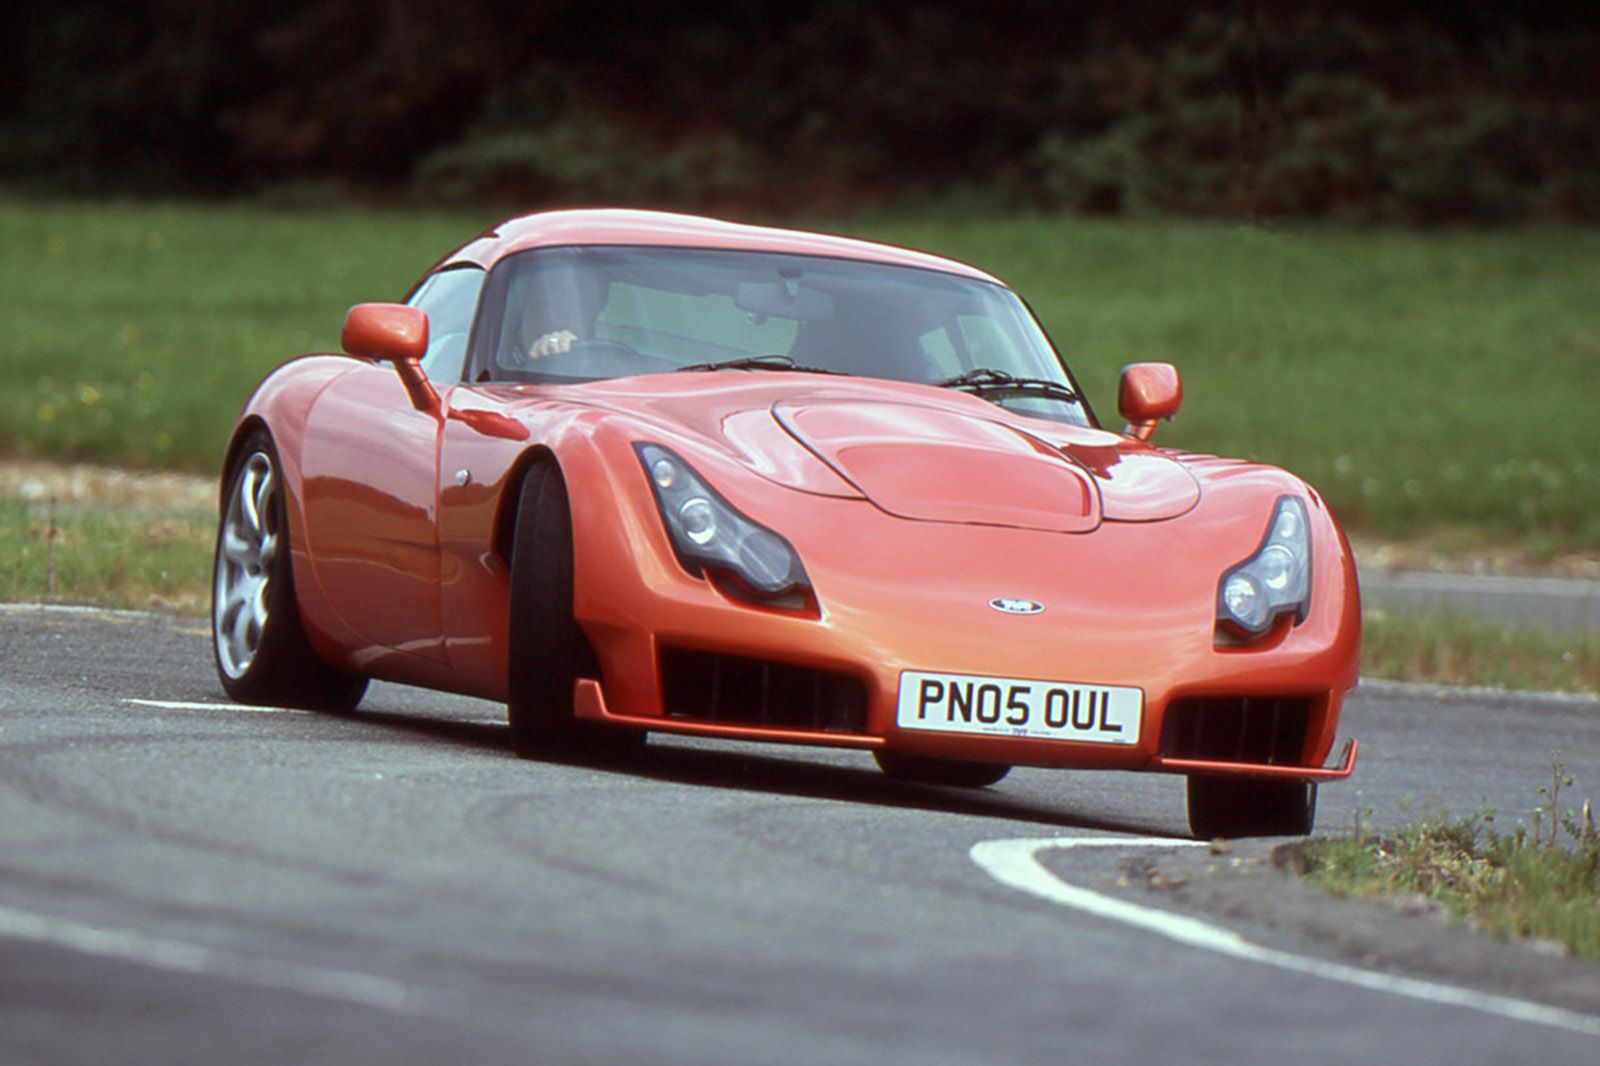 TVR Sagaris Drifting Through The Corners Front View